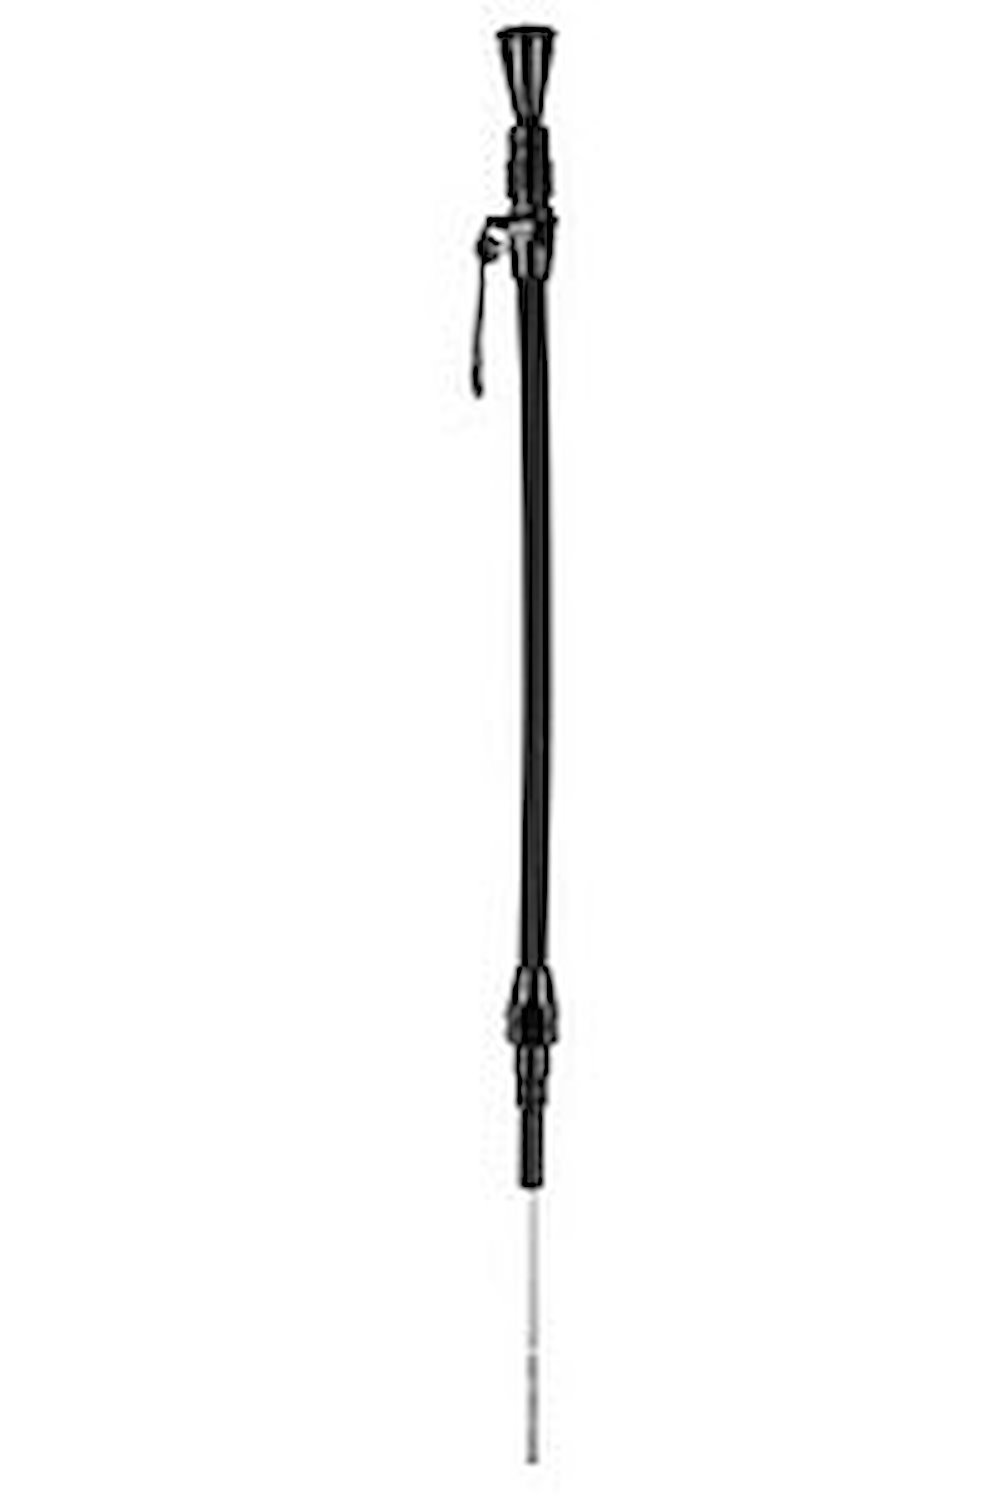 Anchor-Tight Locking Flexible Engine Dipstick 1986-95 Ford 5.0L/302